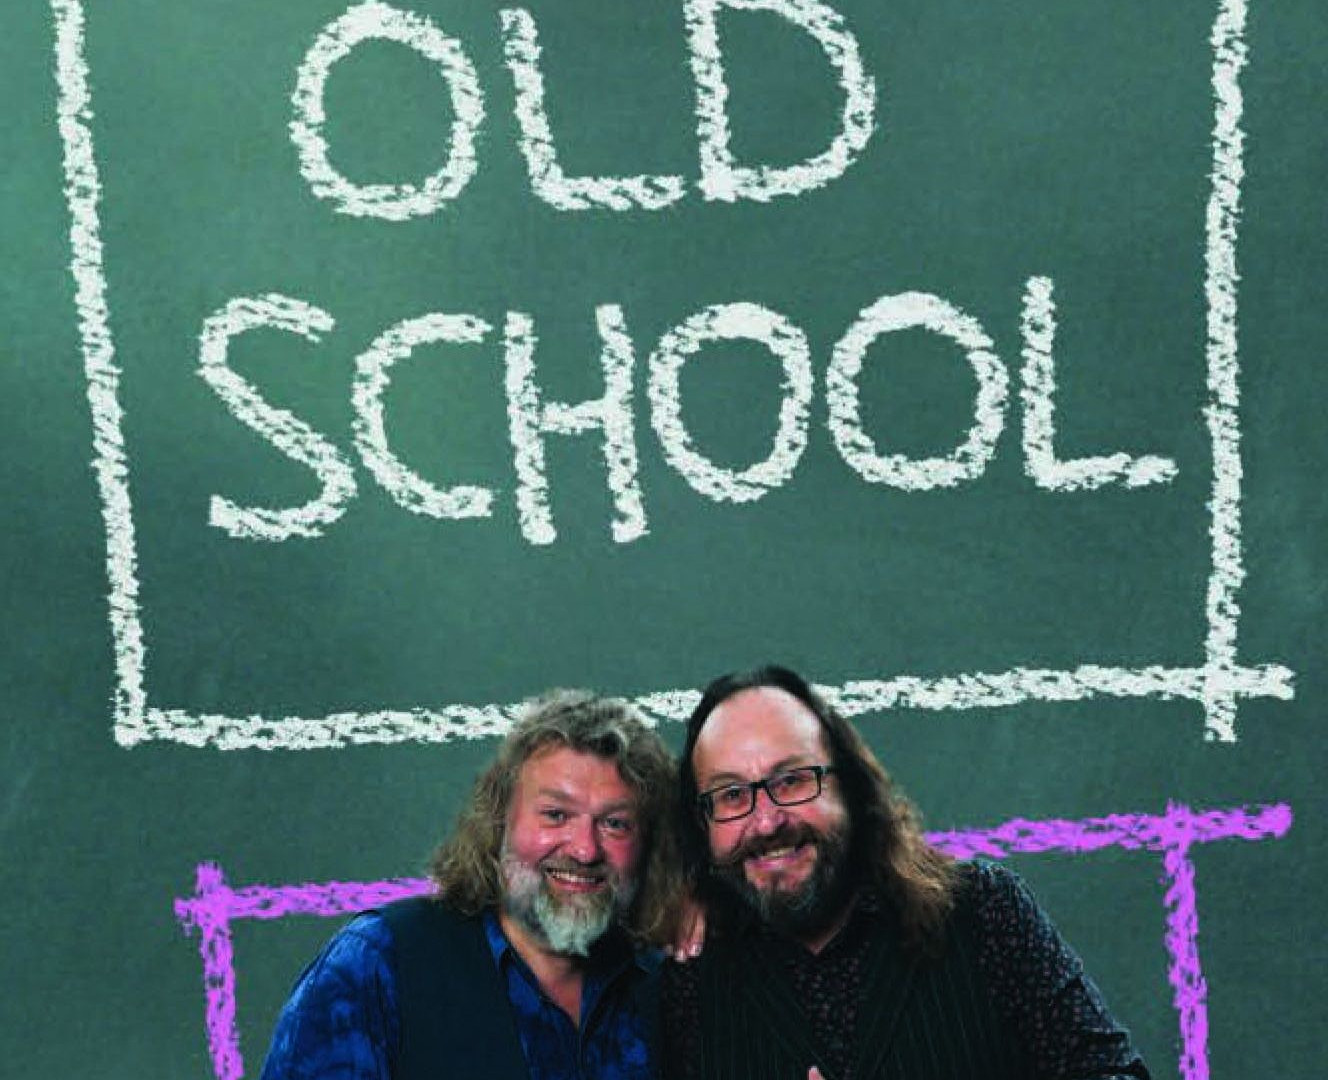 Show Old School with the Hairy Bikers